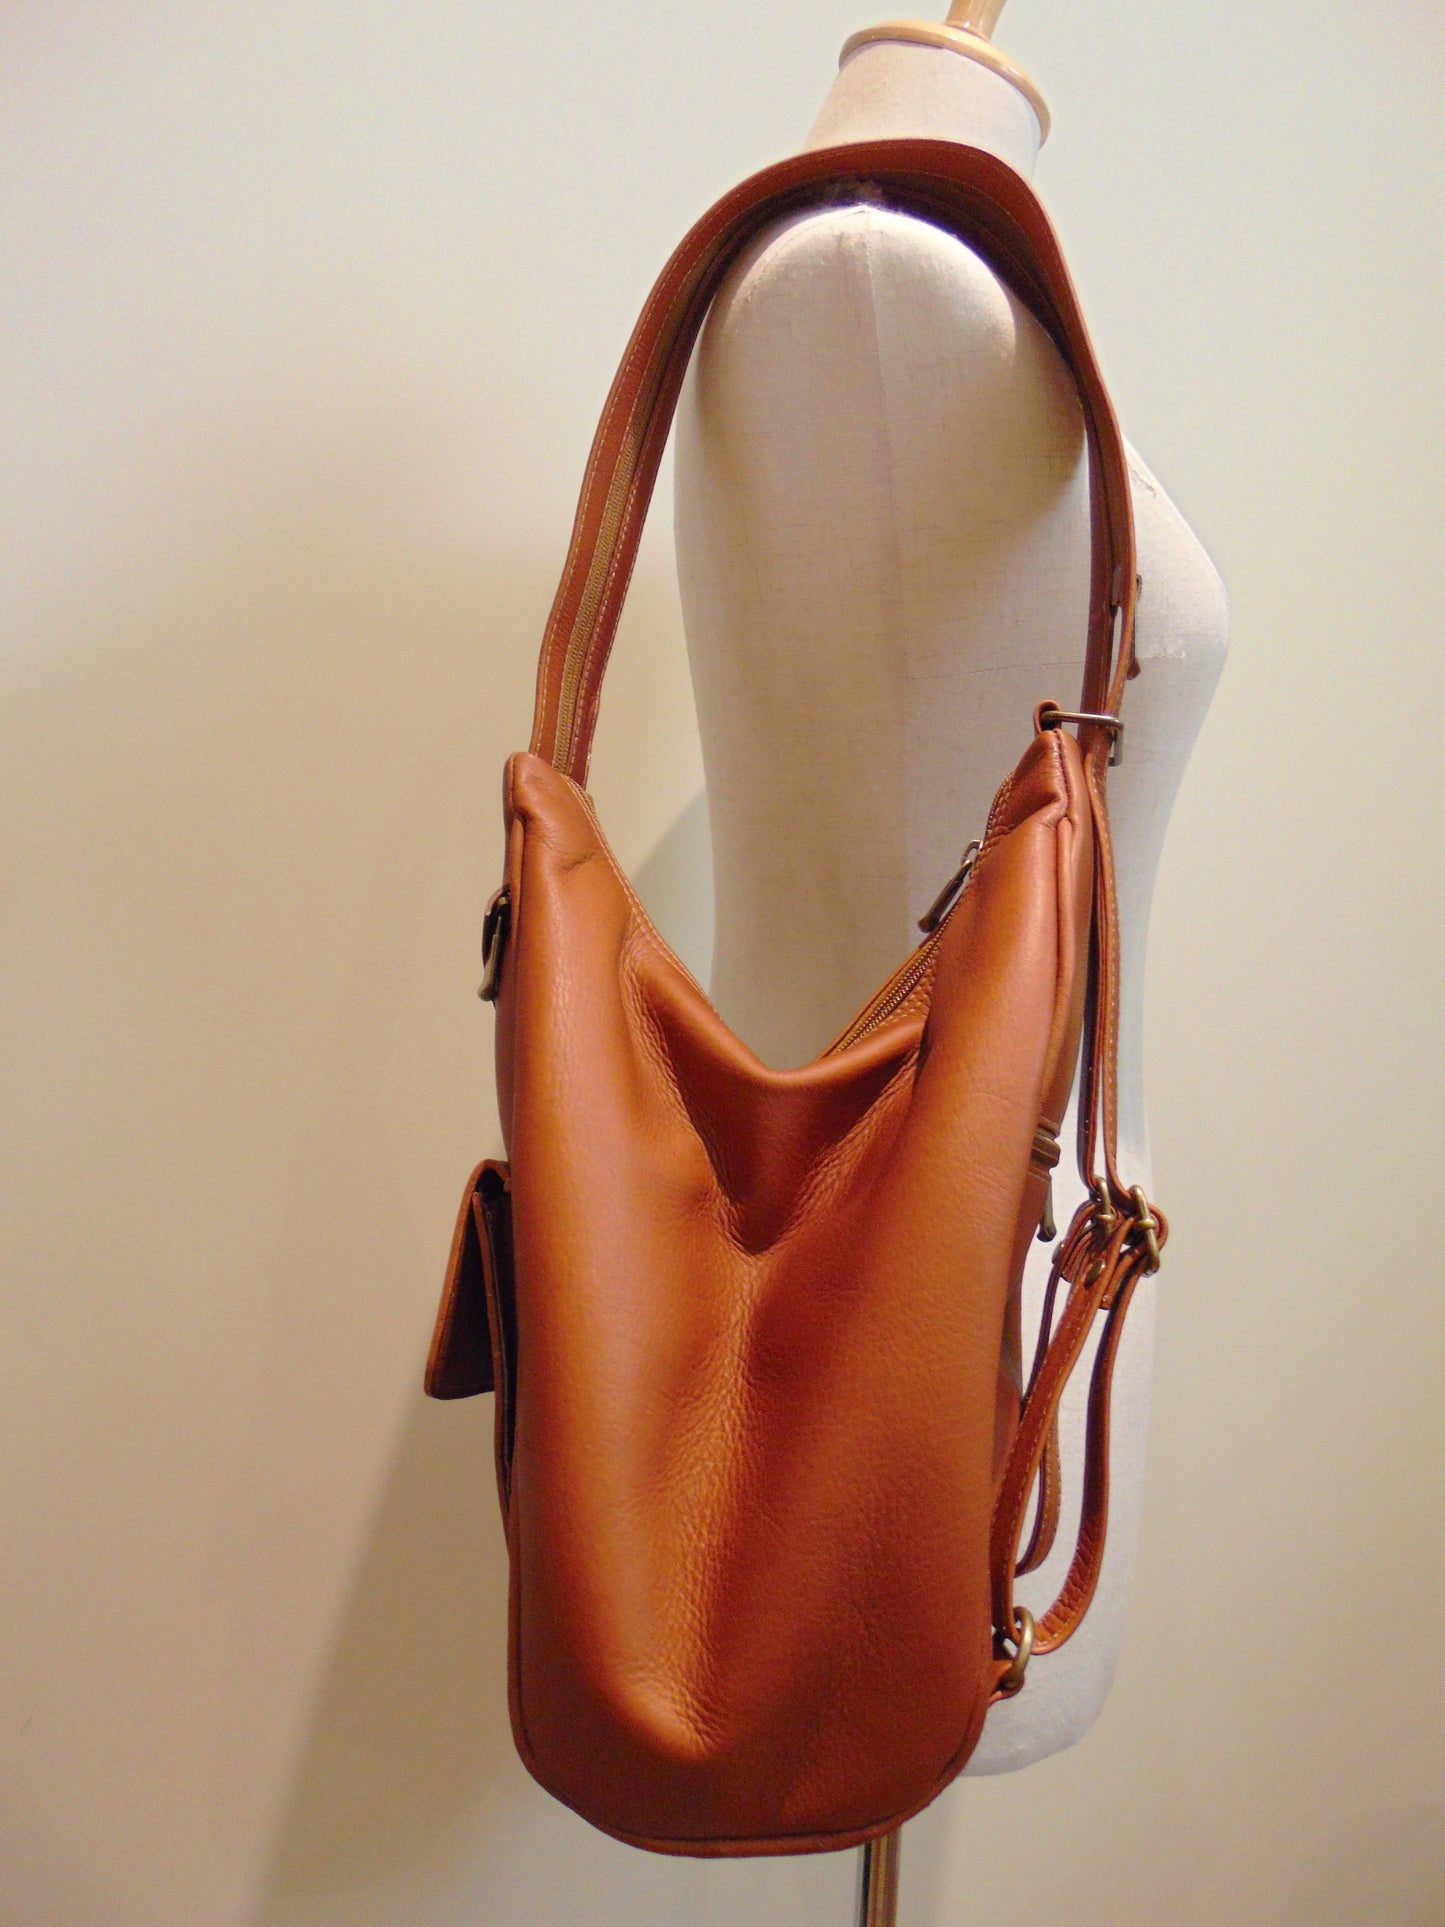 Small Tan Leather Backpack